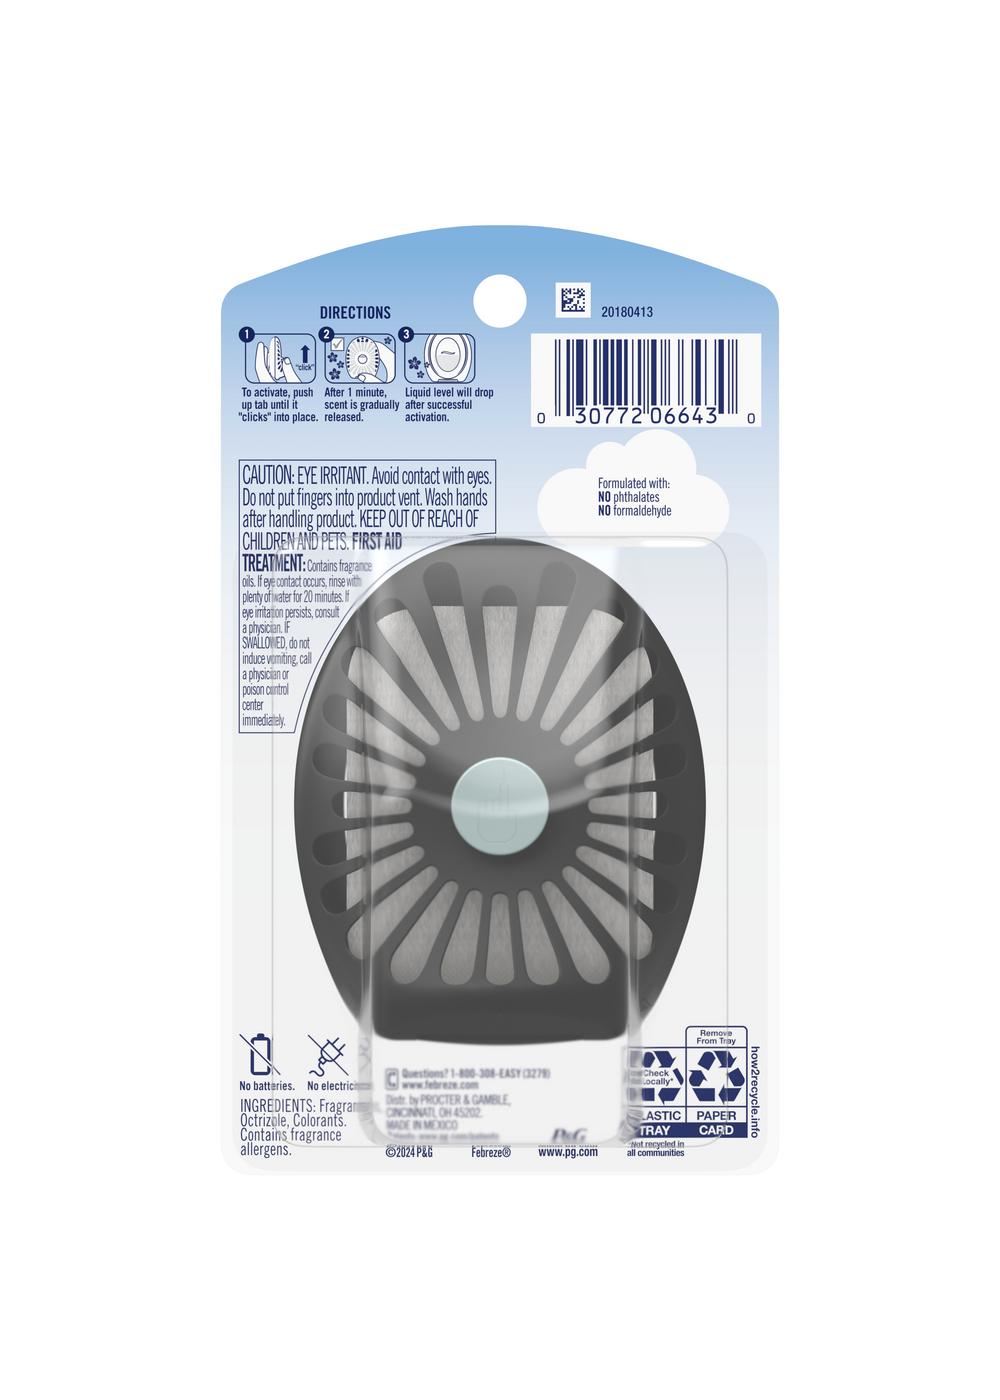 Febreze Small Spaces Air Freshener - Downy Infusions Calm Lavender & Vanilla Bean; image 2 of 2